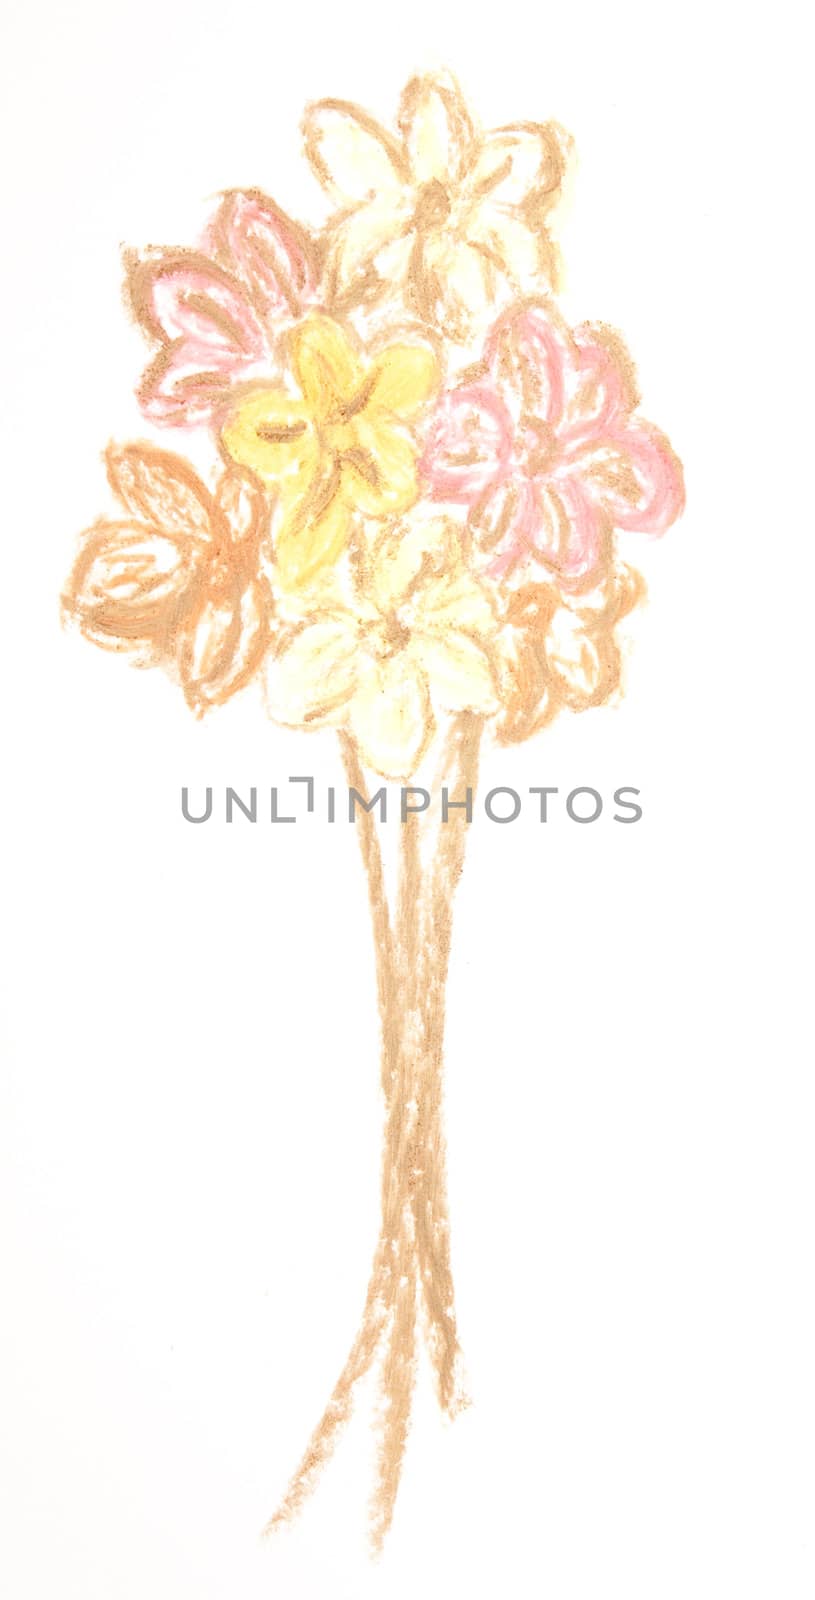 Flowers drawn with wax chalk isolated on white